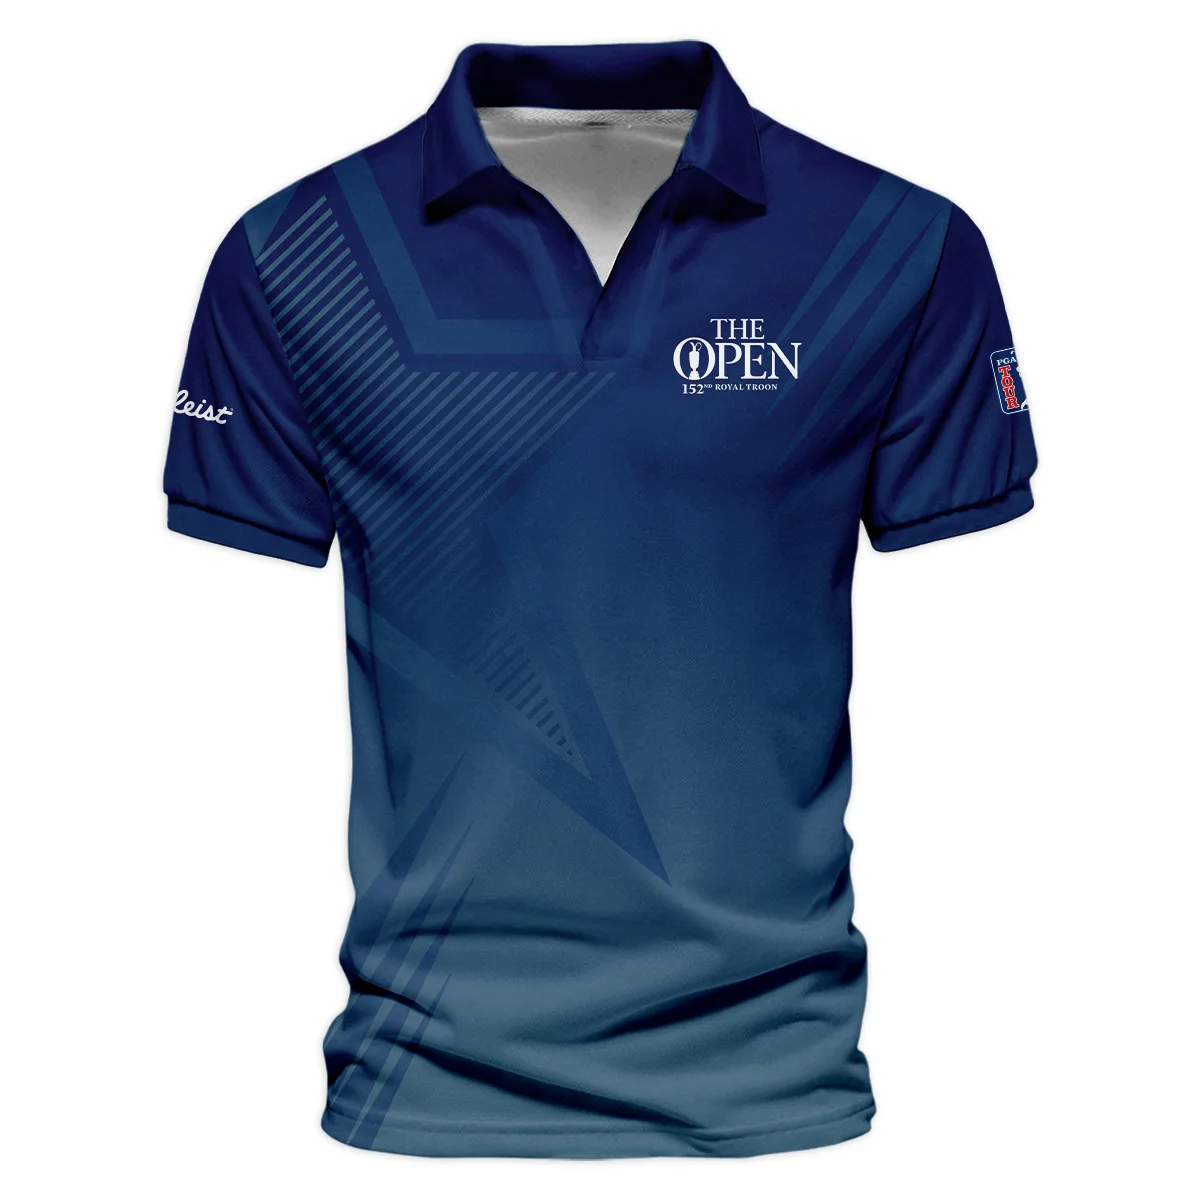 Titleist 152nd Open Championship Abstract Background Dark Blue Gradient Star Line Vneck Polo Shirt All Over Prints  HOTOP260624A04TLZVPL